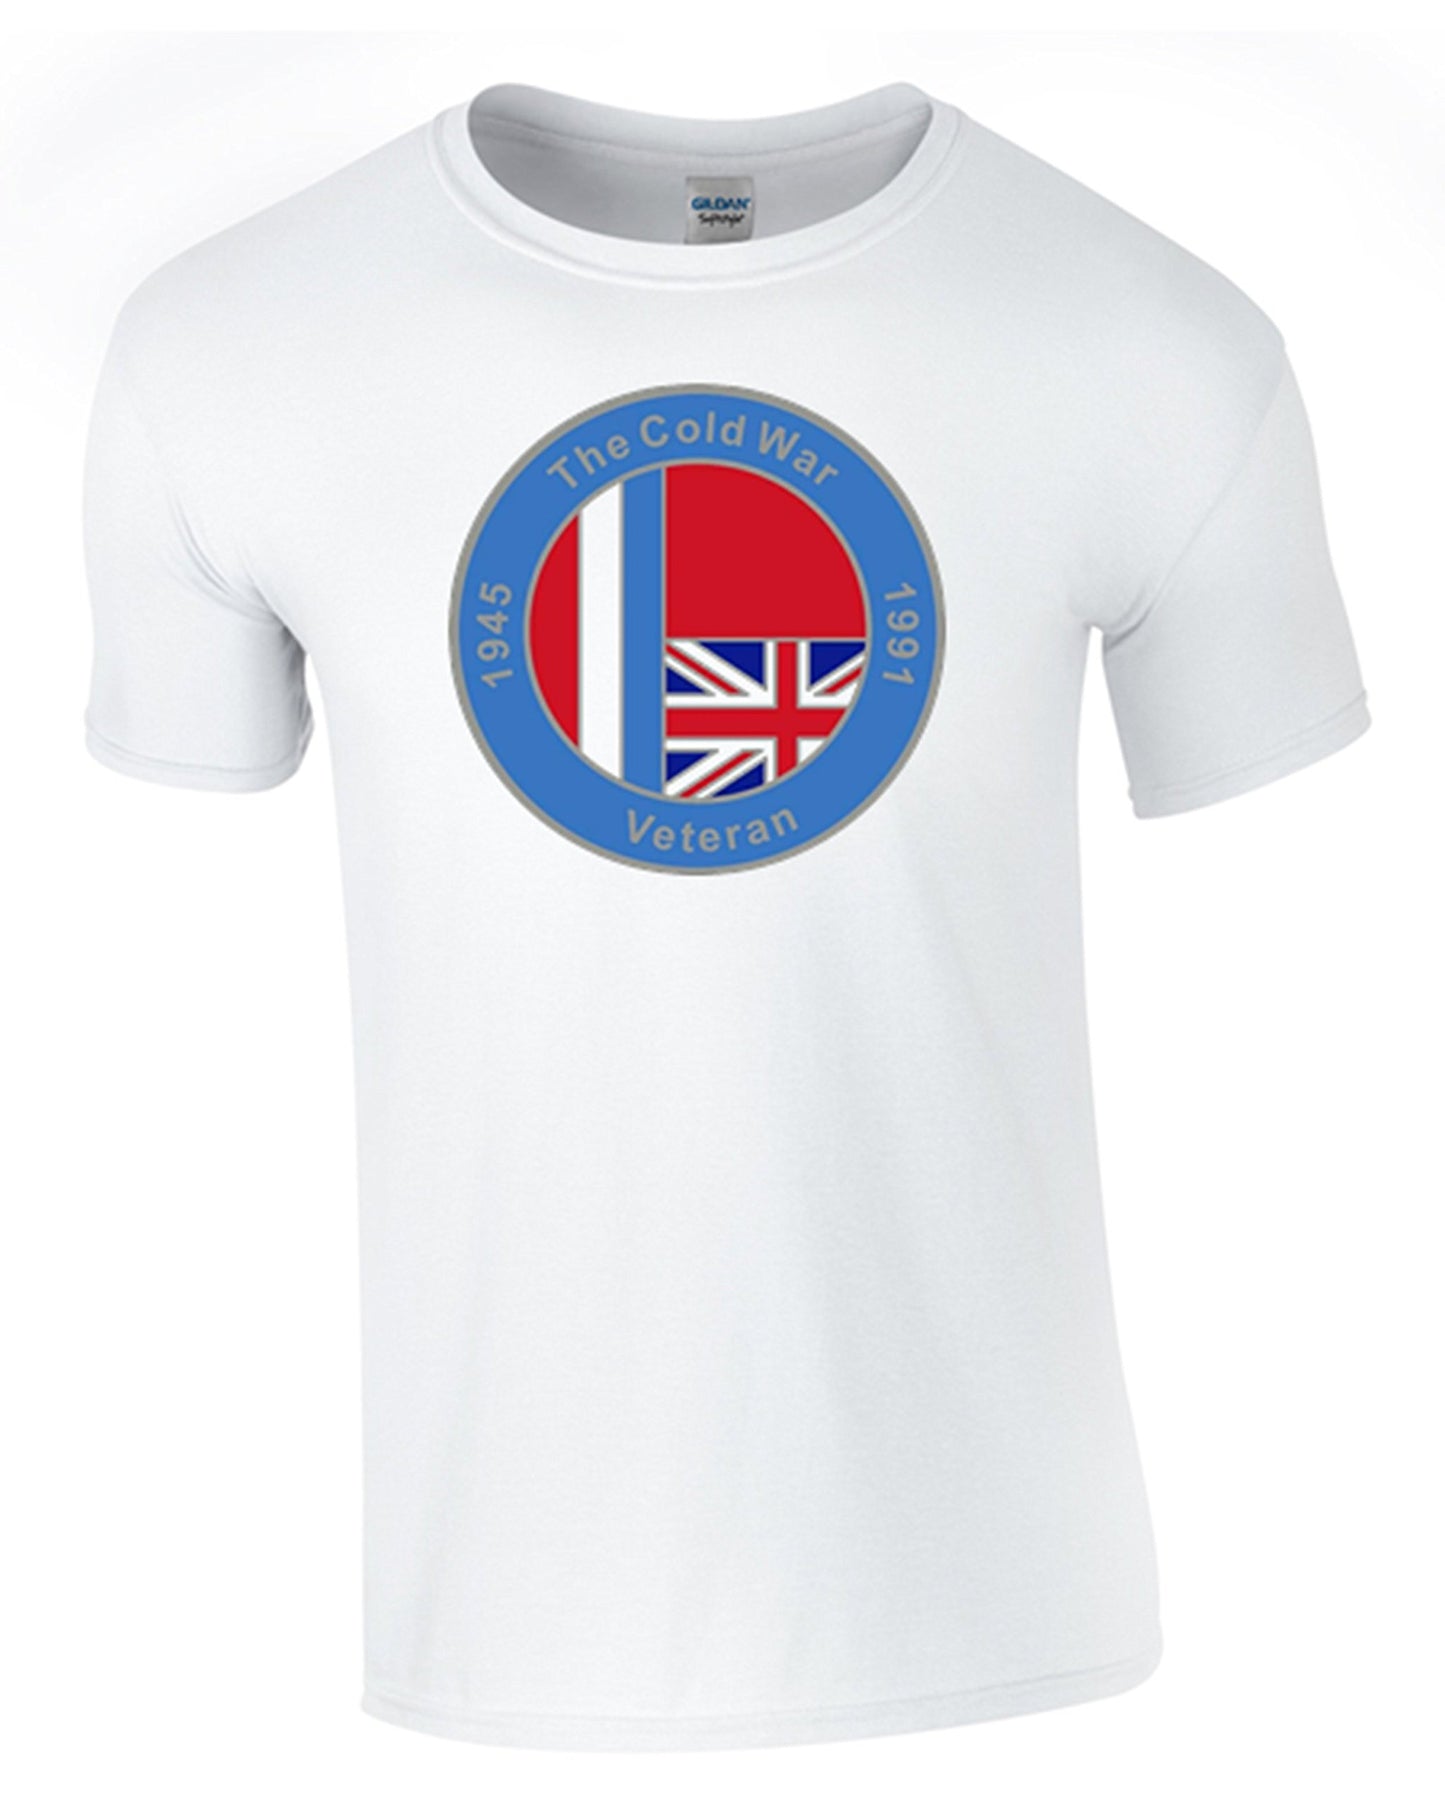 Bear Essentials Clothing. Cold War Op Banner T/Shirt (XXL, White) - Army 1157 kit Army 1157 Kit